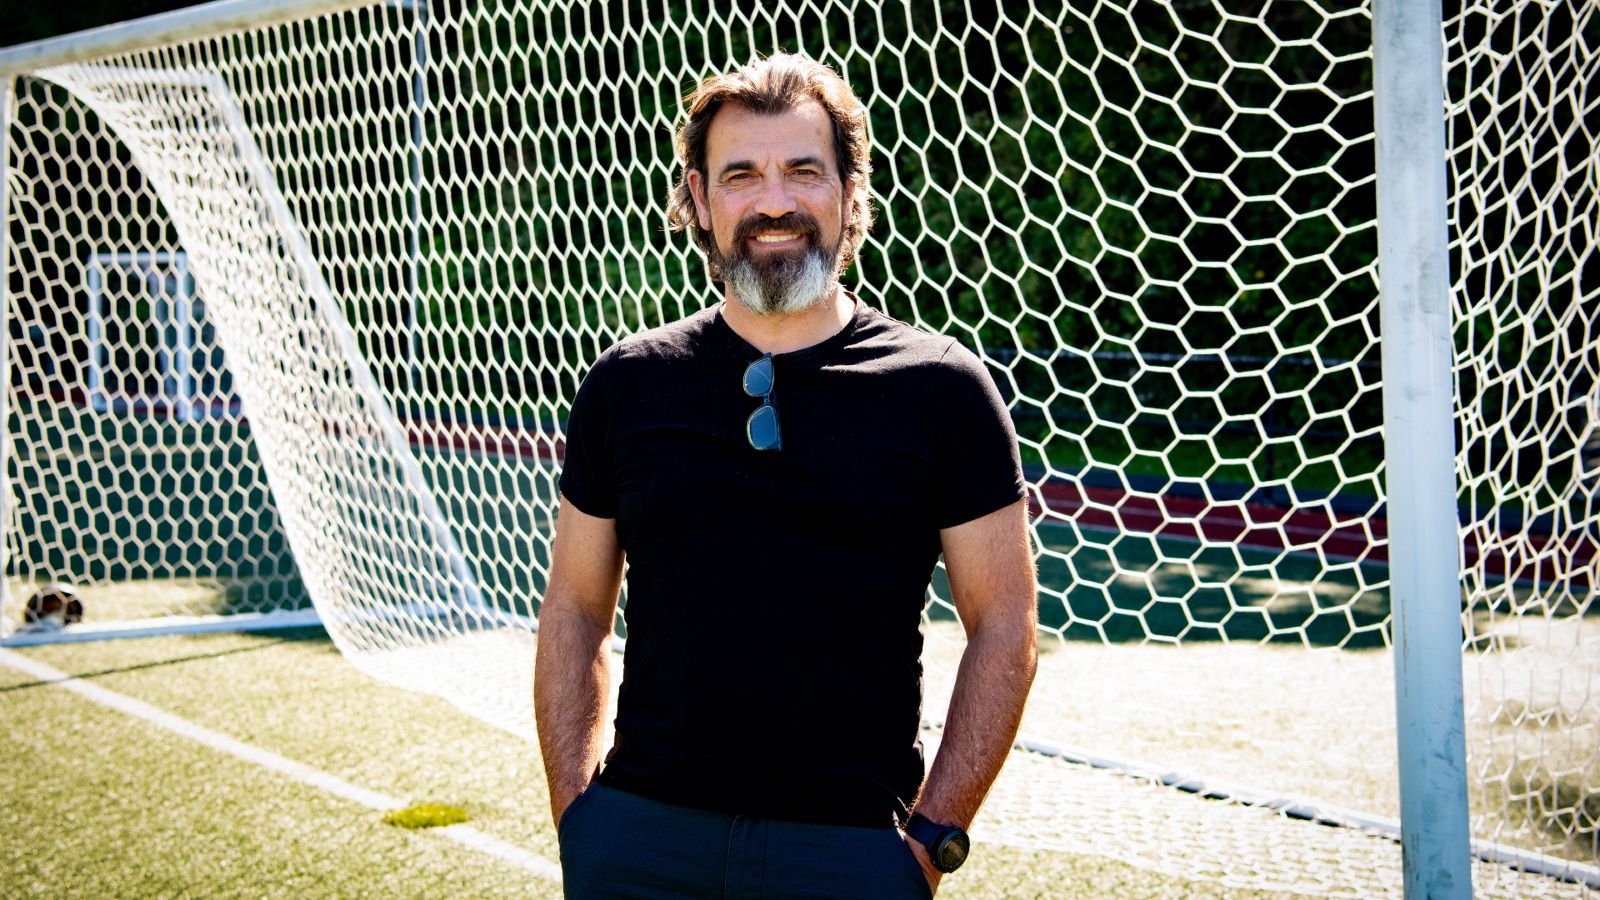 Geoff Kira poses for a photo in front of a football net.